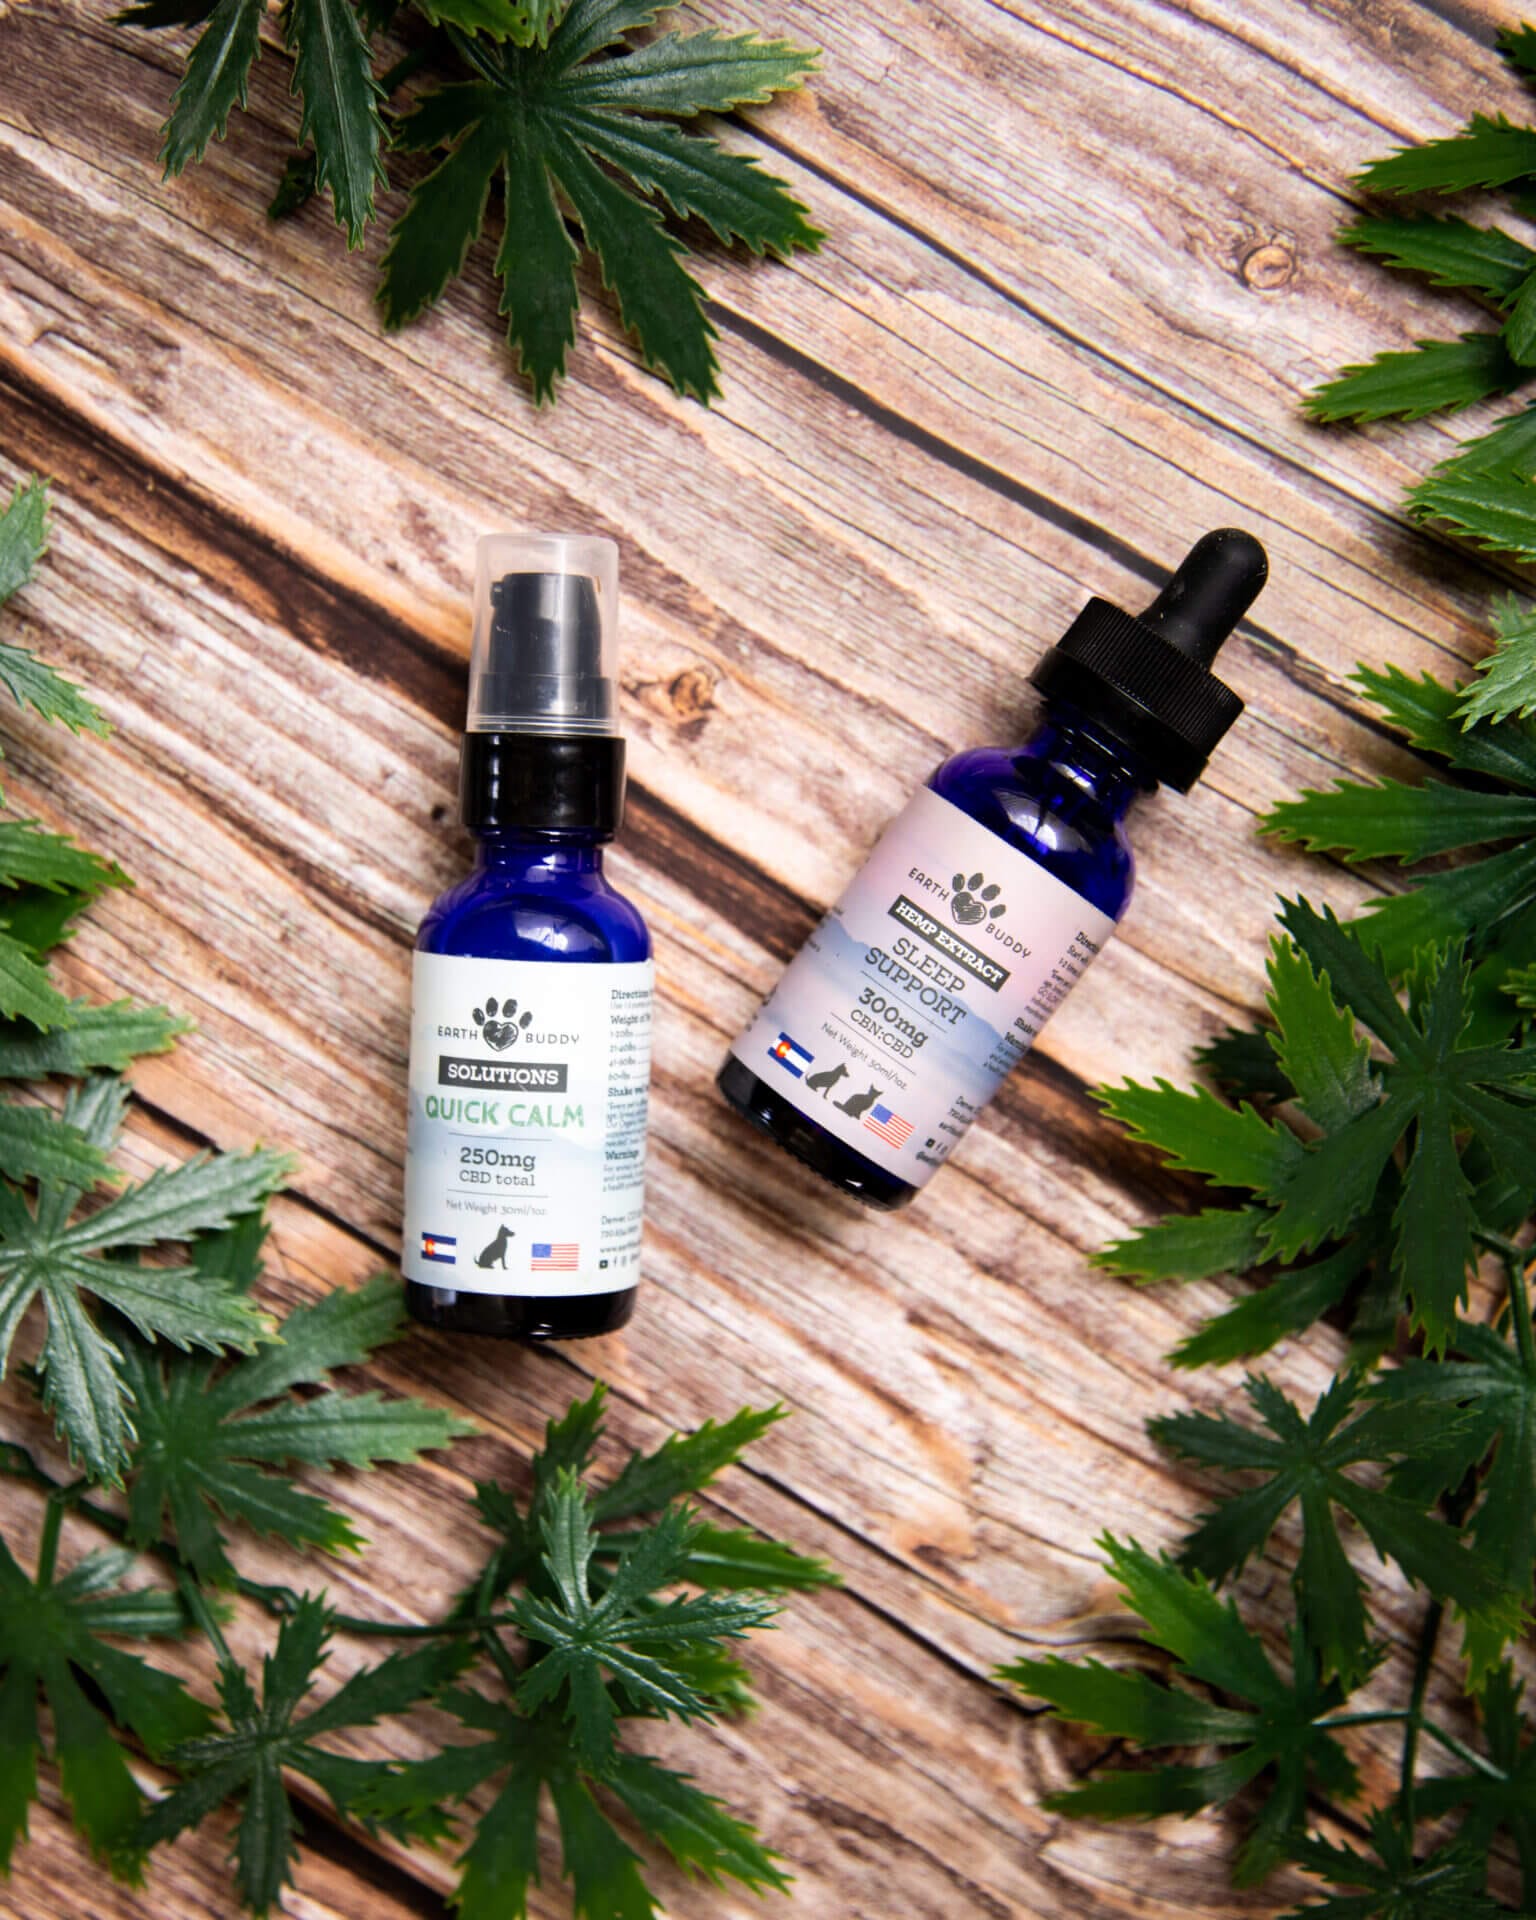 Earth Buddy CBD tinctures that are a part of a pet calming supplements bundle.